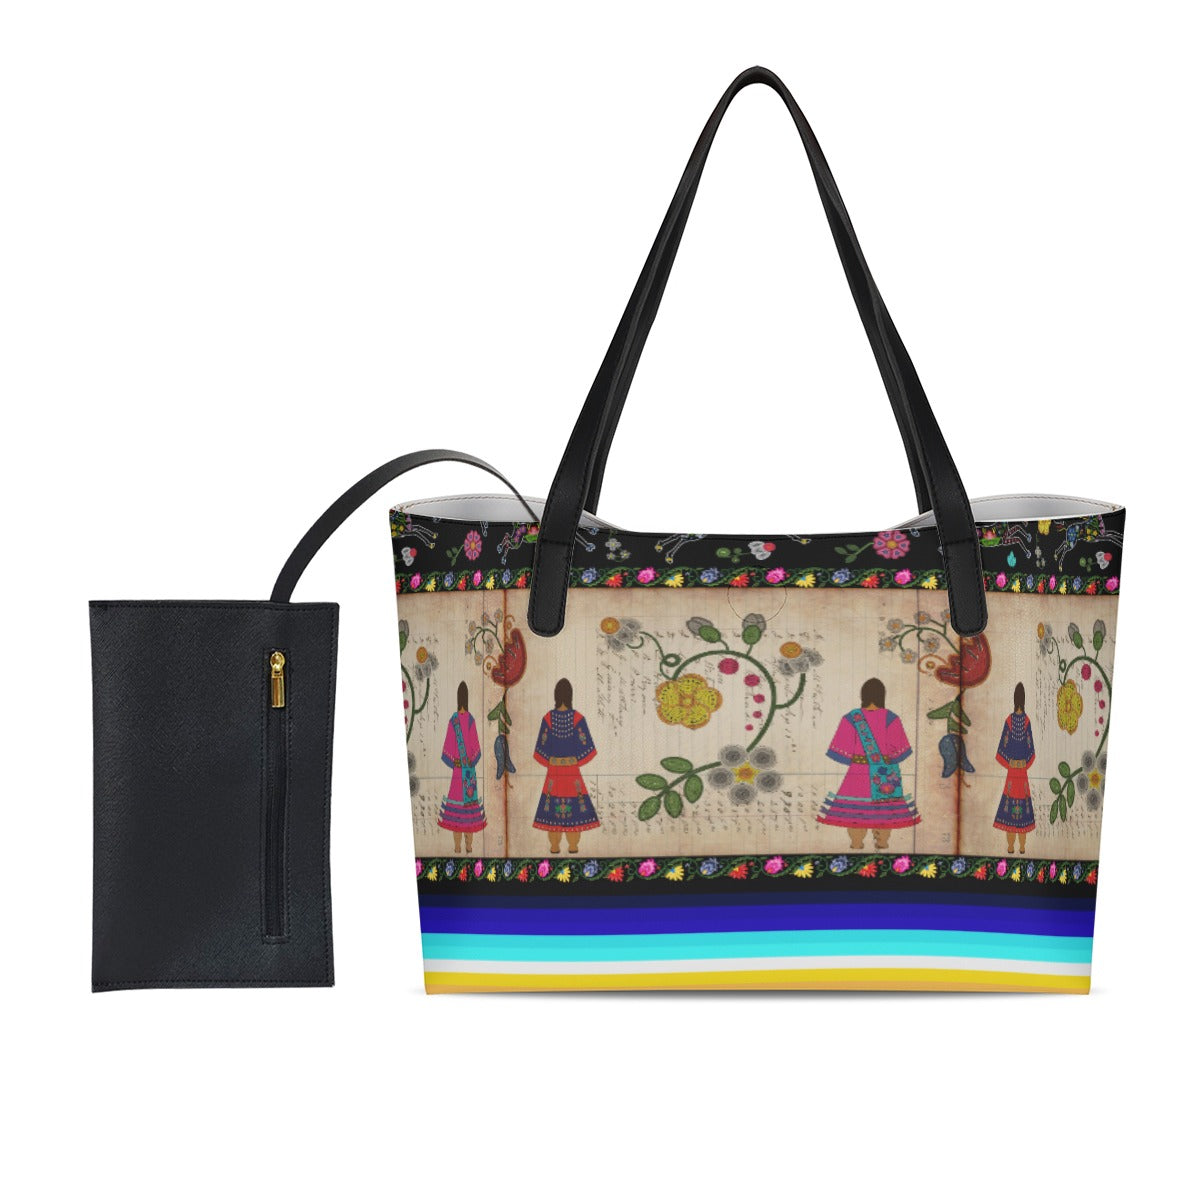 Floral Ledger Sisters Shopping Tote Bag With Black Mini Purse